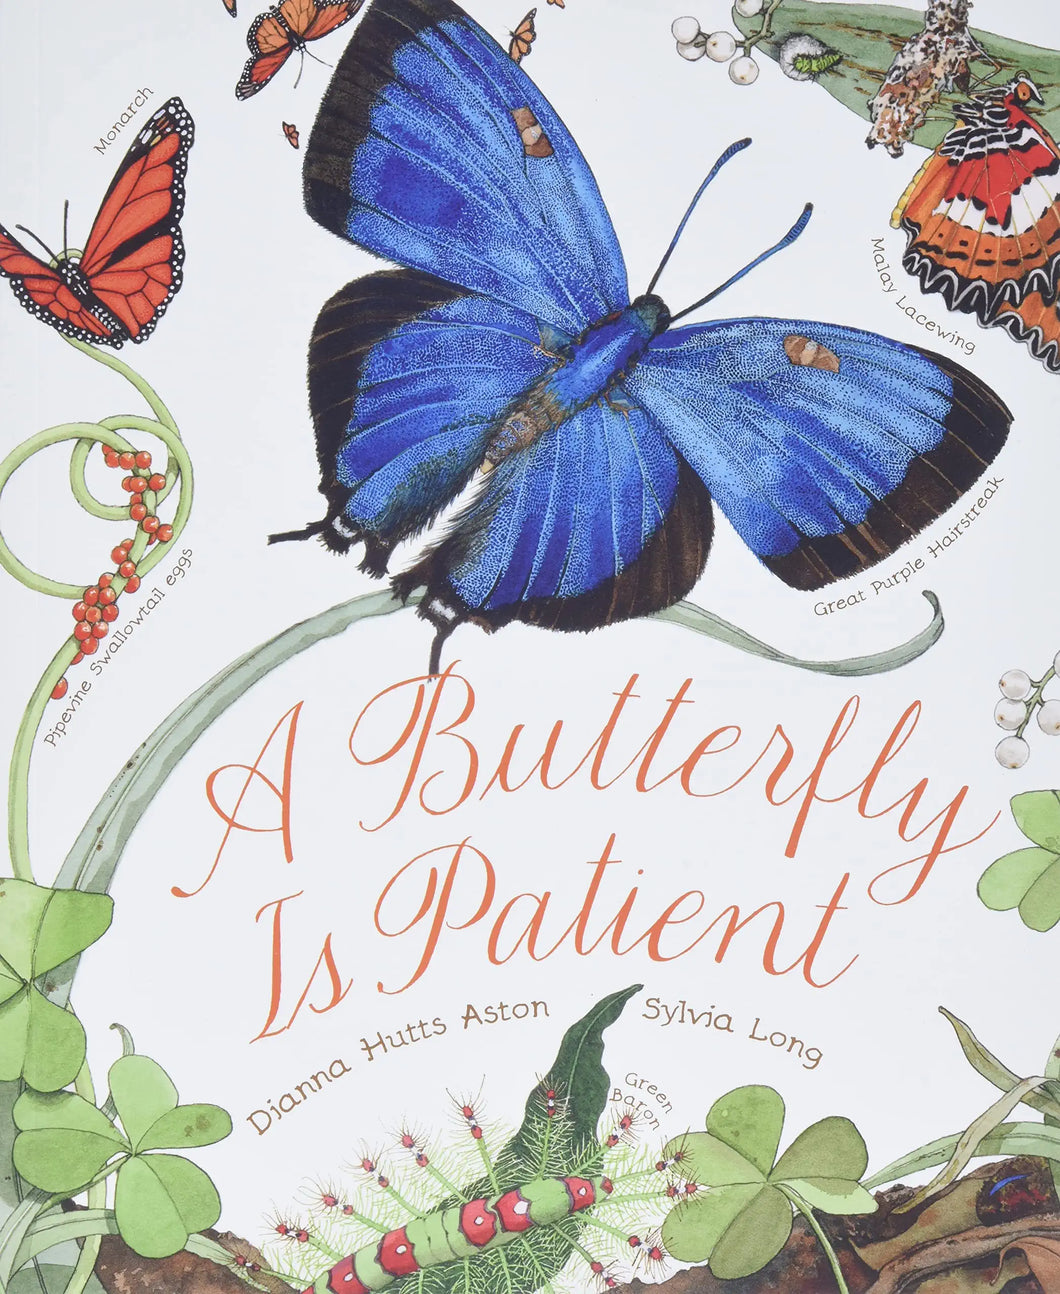 A Butterfly is Patient